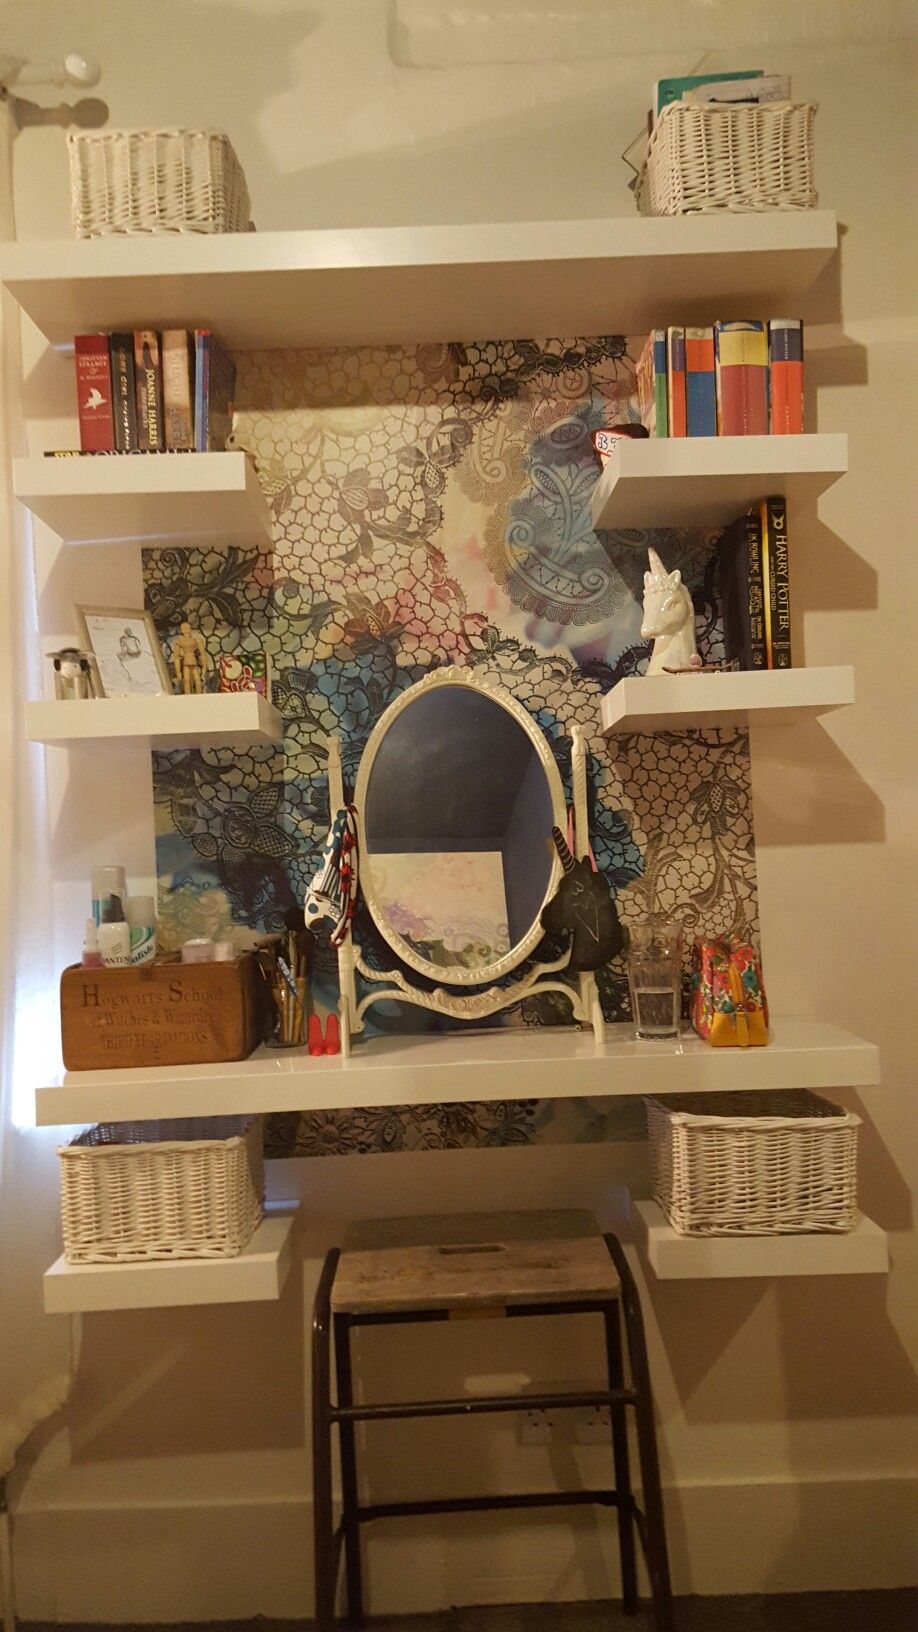 dressing table use floating shelves rather than saves shelf space old stool and adds hint needed shabbiness amongst the clean suspended vanity cabinet bathroom under counter